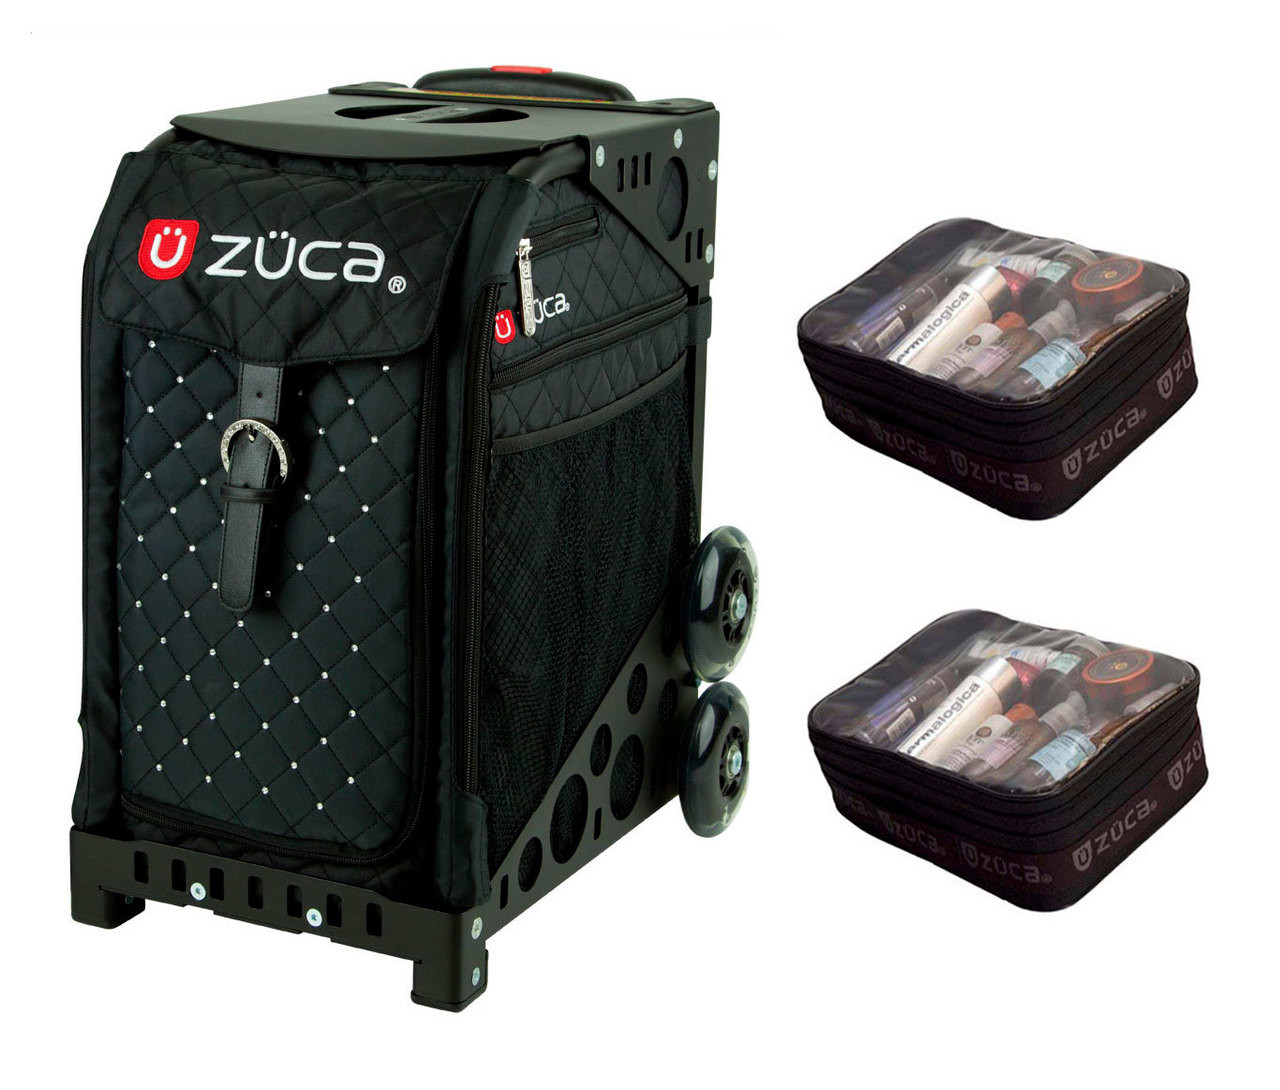 Zuca Sport: A travel bag with integrated seat - Bike Hugger